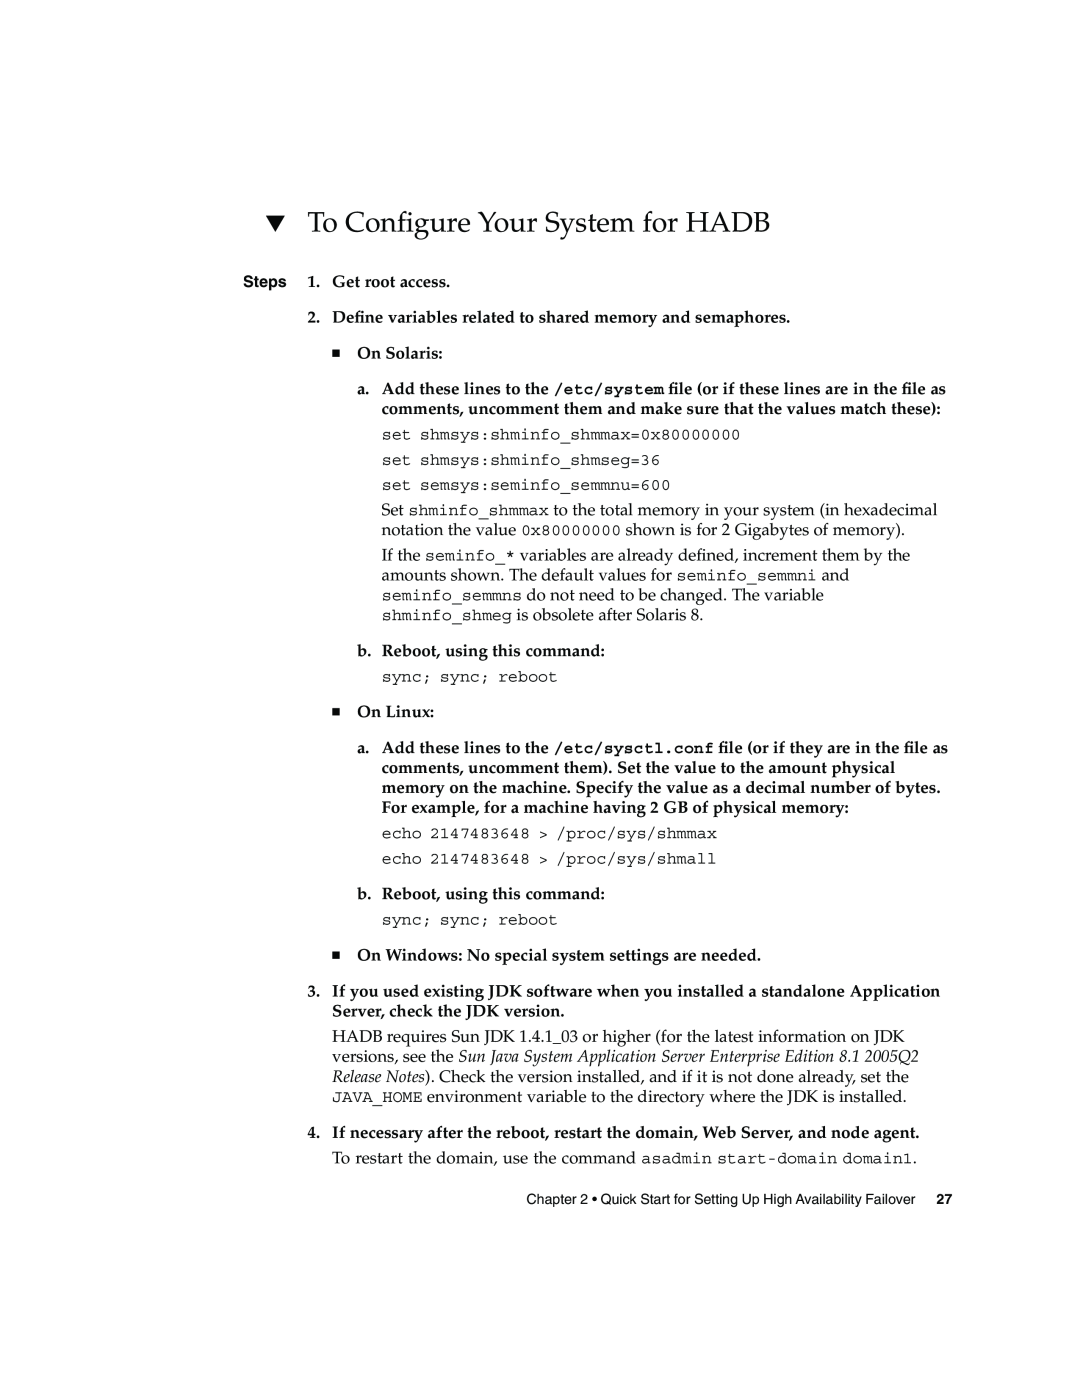 Sun Microsystems 2005Q2 quick start To Conﬁgure Your System for HADB 